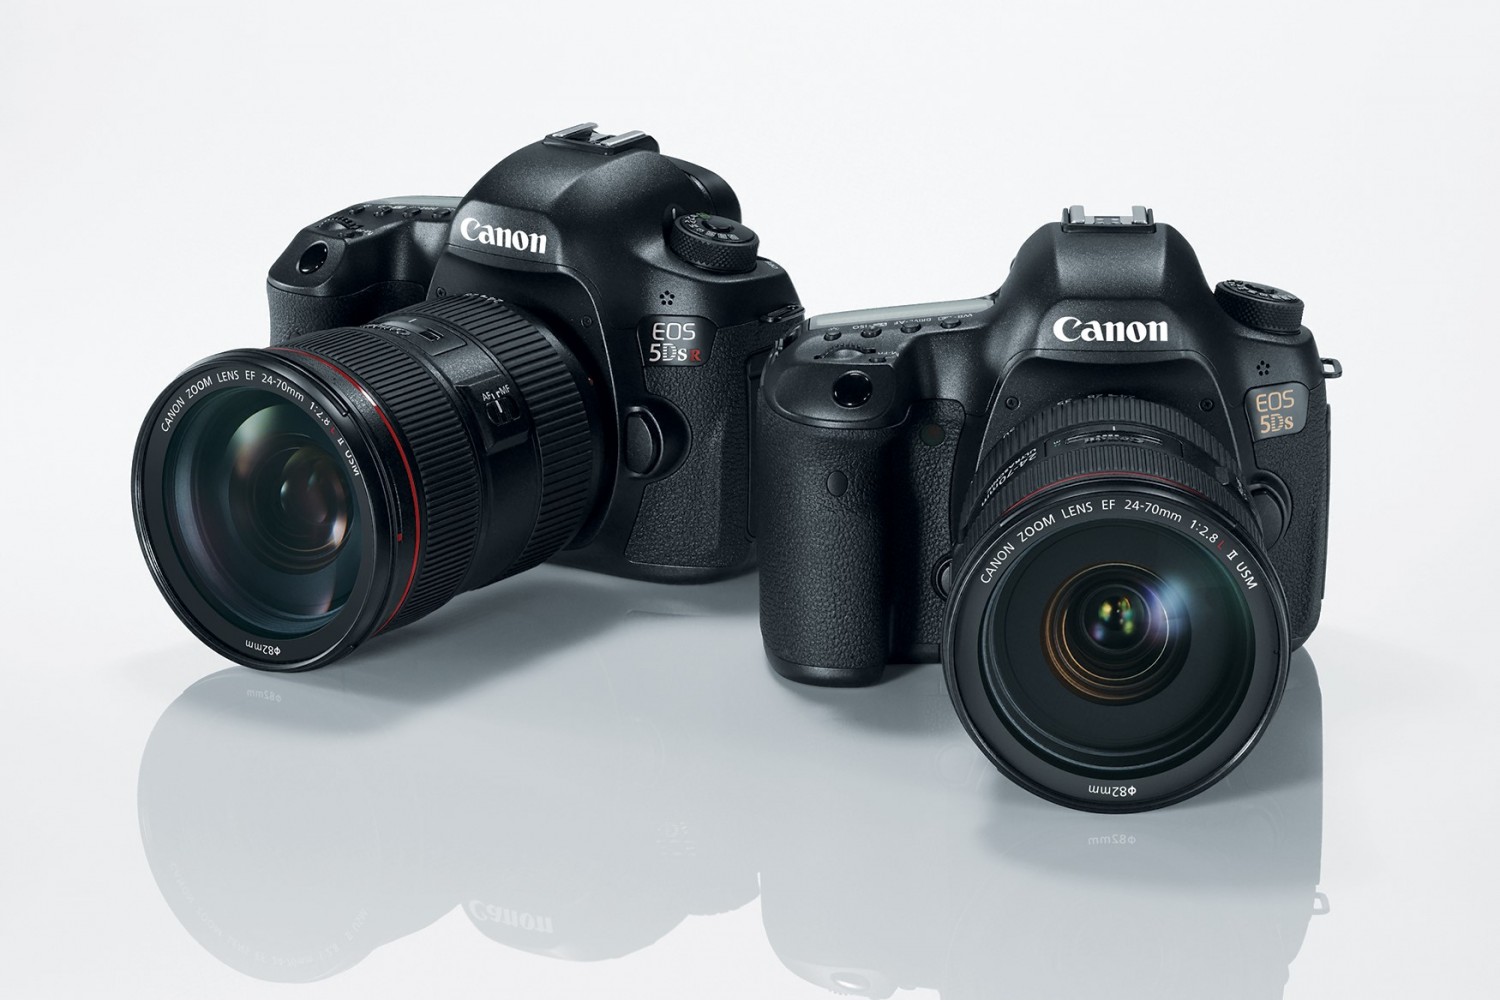 Say Hello to the 50MP Canon 5DS and 5DS R: The World's Highest Resolution Full-Frame DSLRs